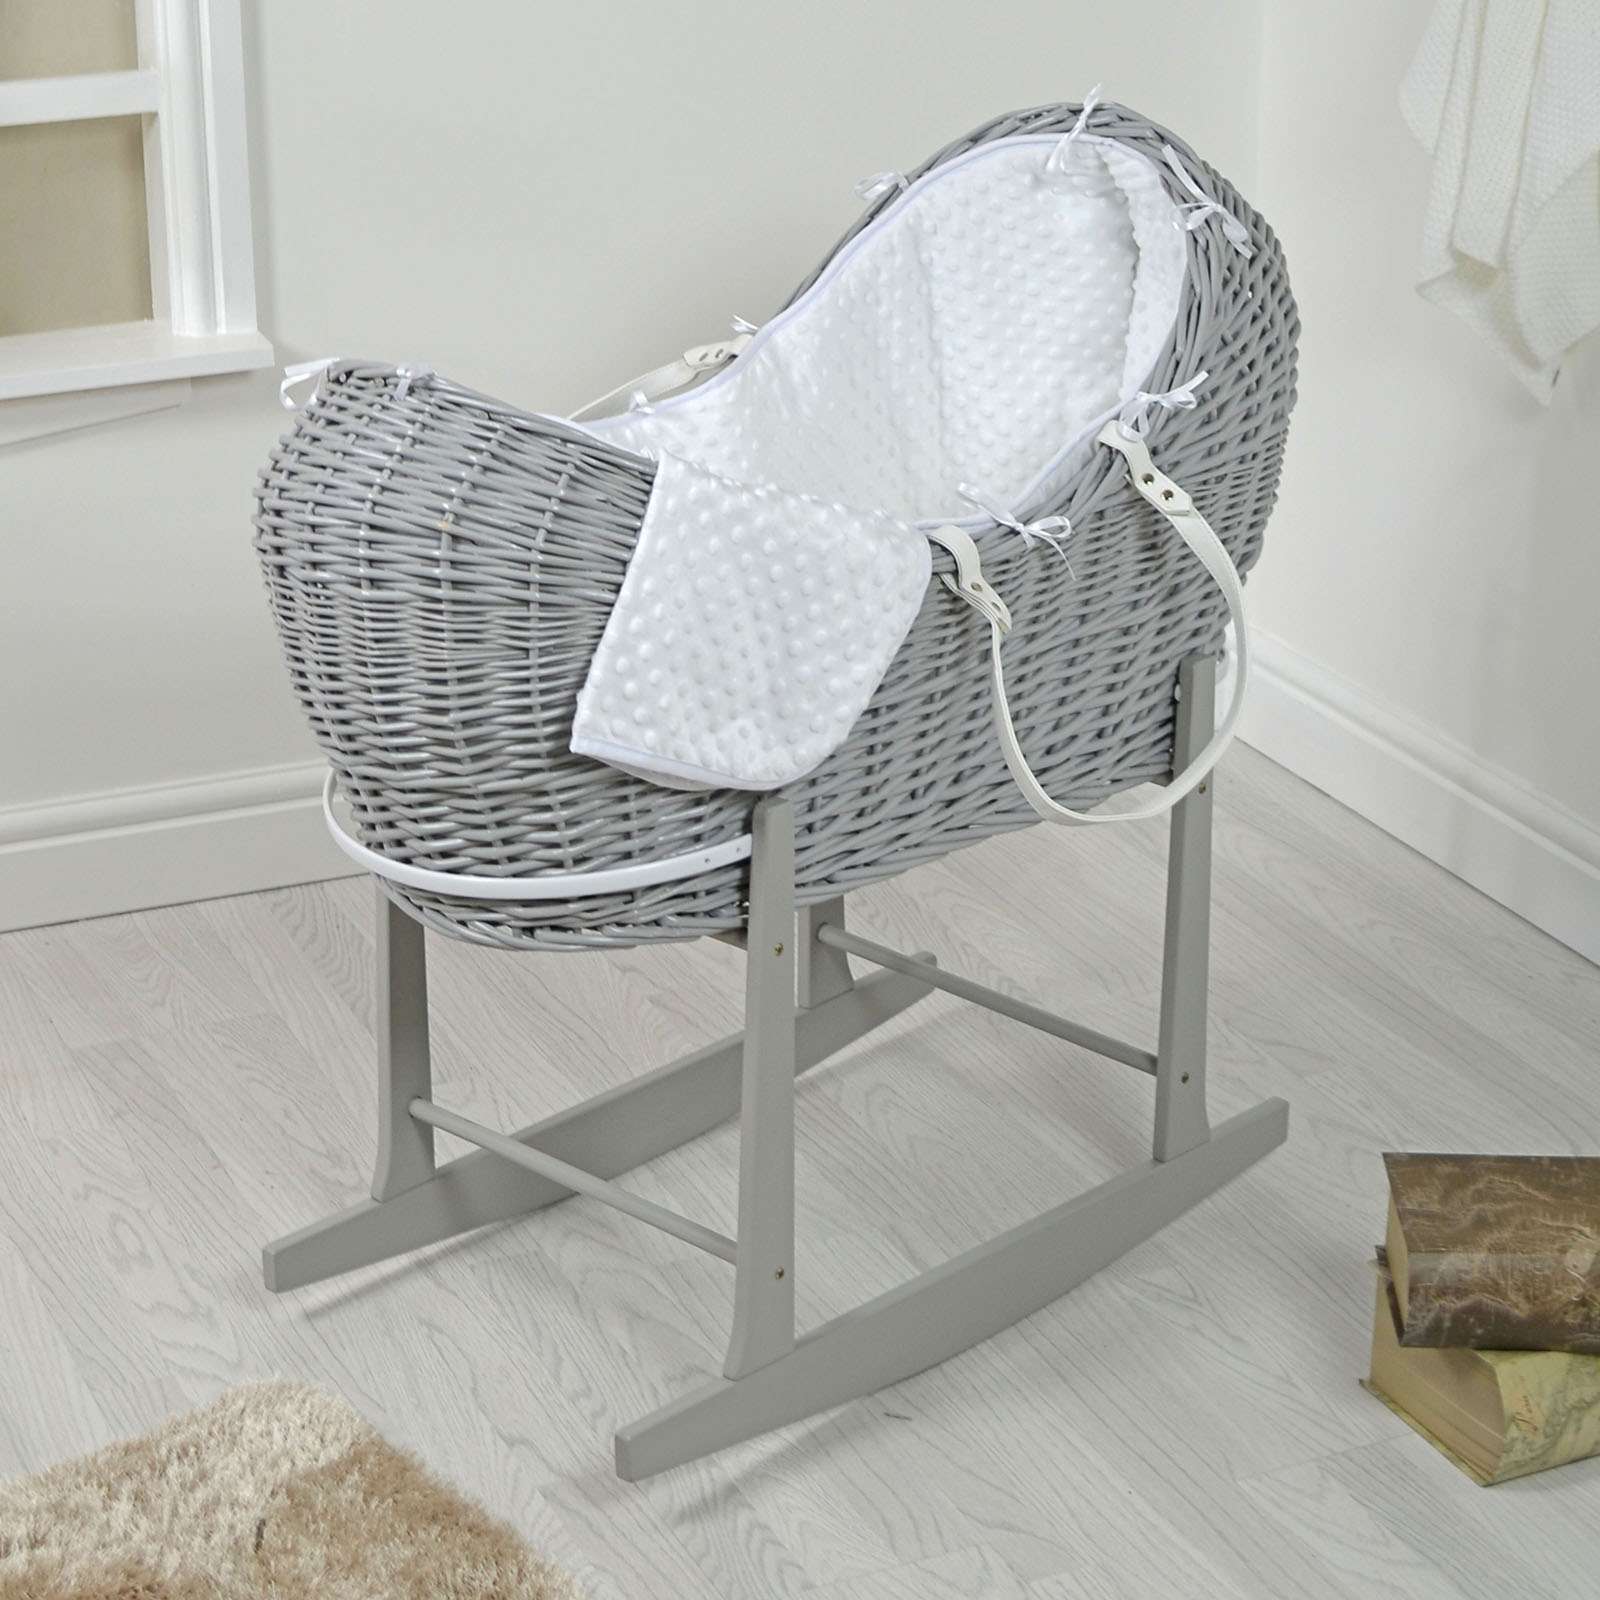 4baby Grey Wicker Sleep Pod Moses Basket & Rocking Stand - White Dimple